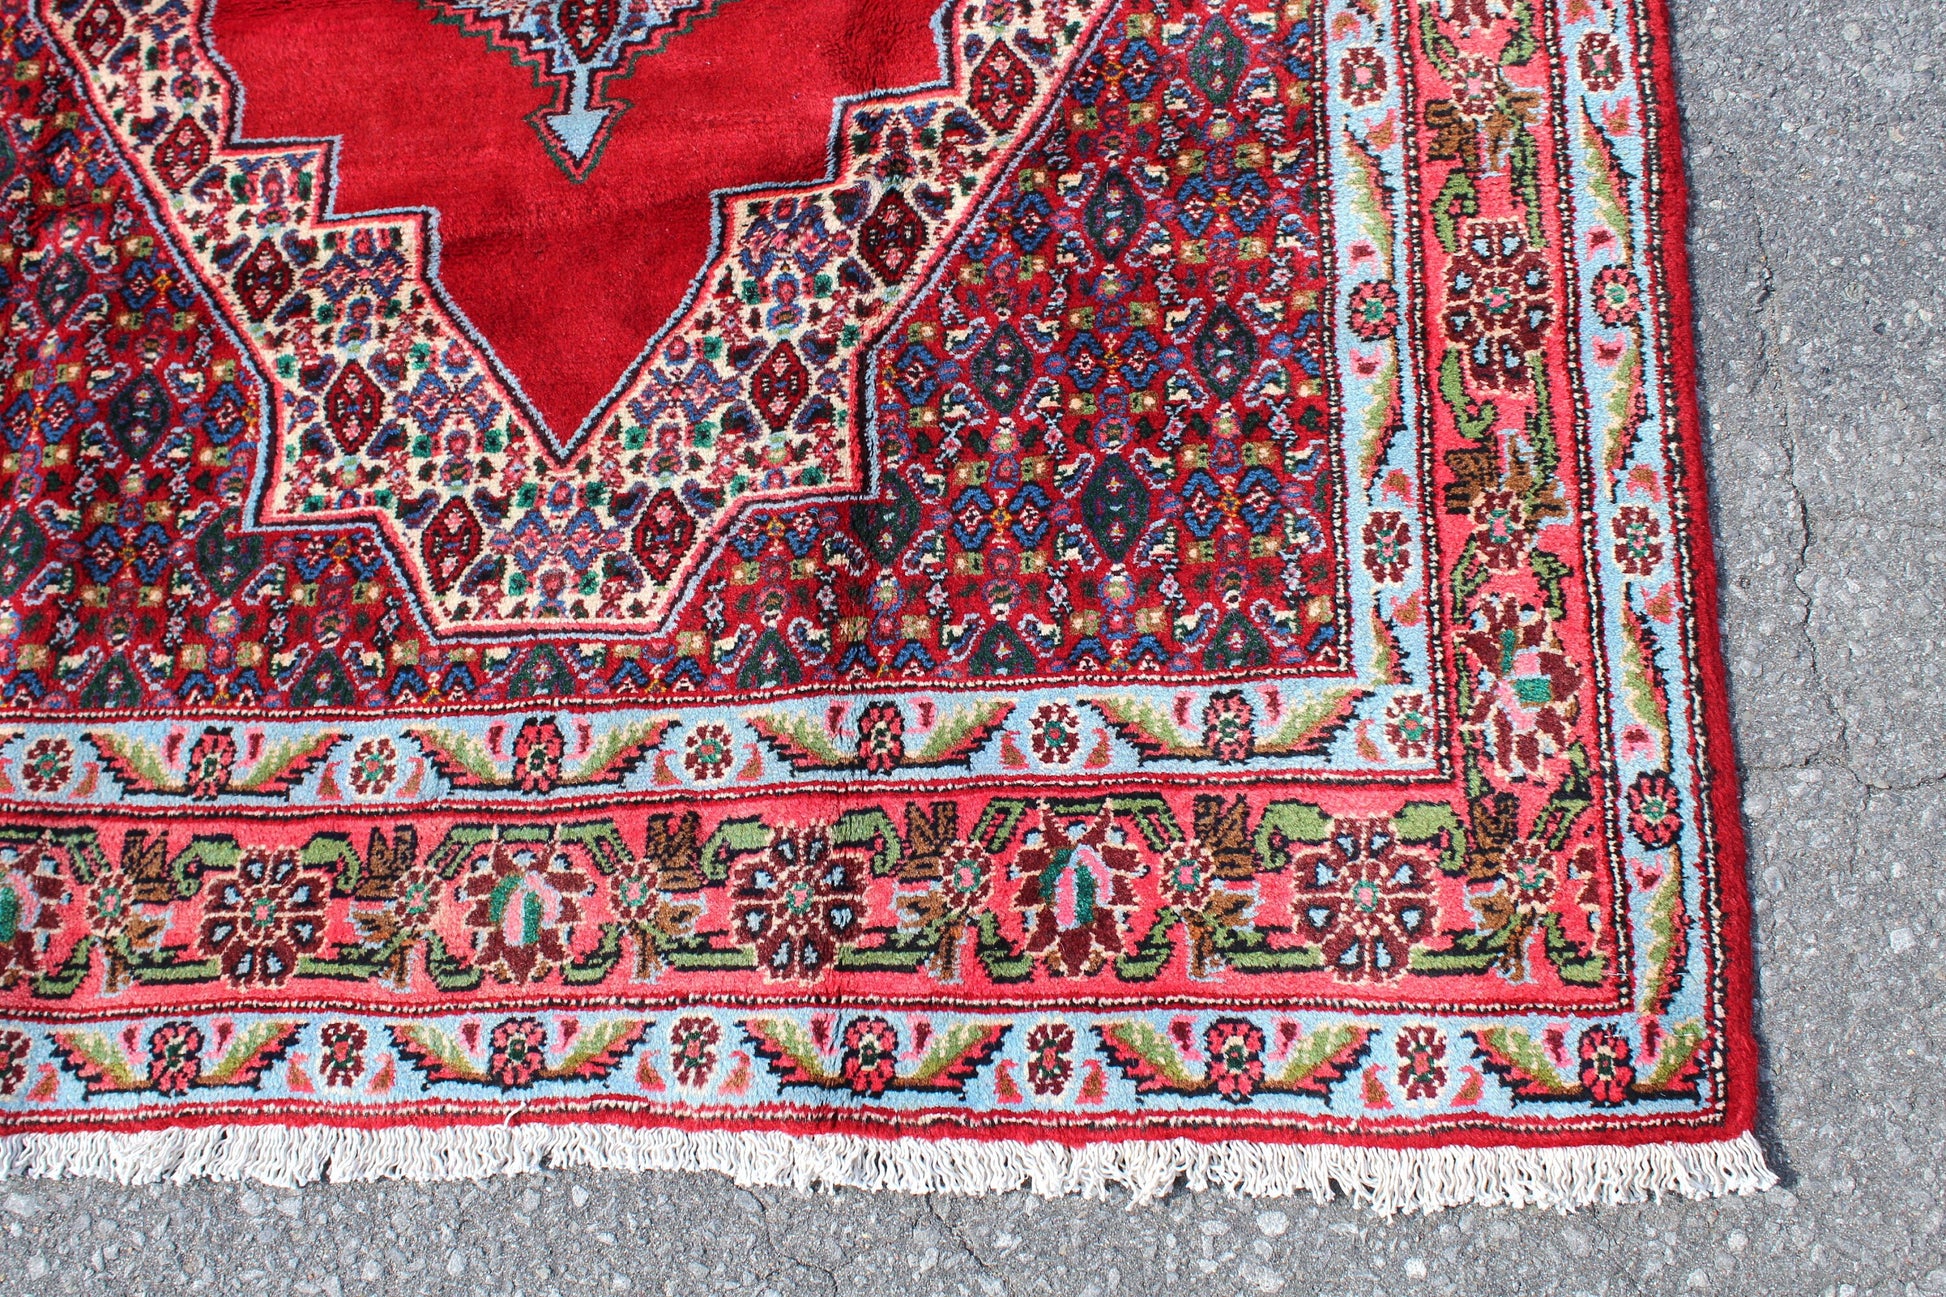 Blue Red rug with Bright Red Medallion 4' x 5'1"